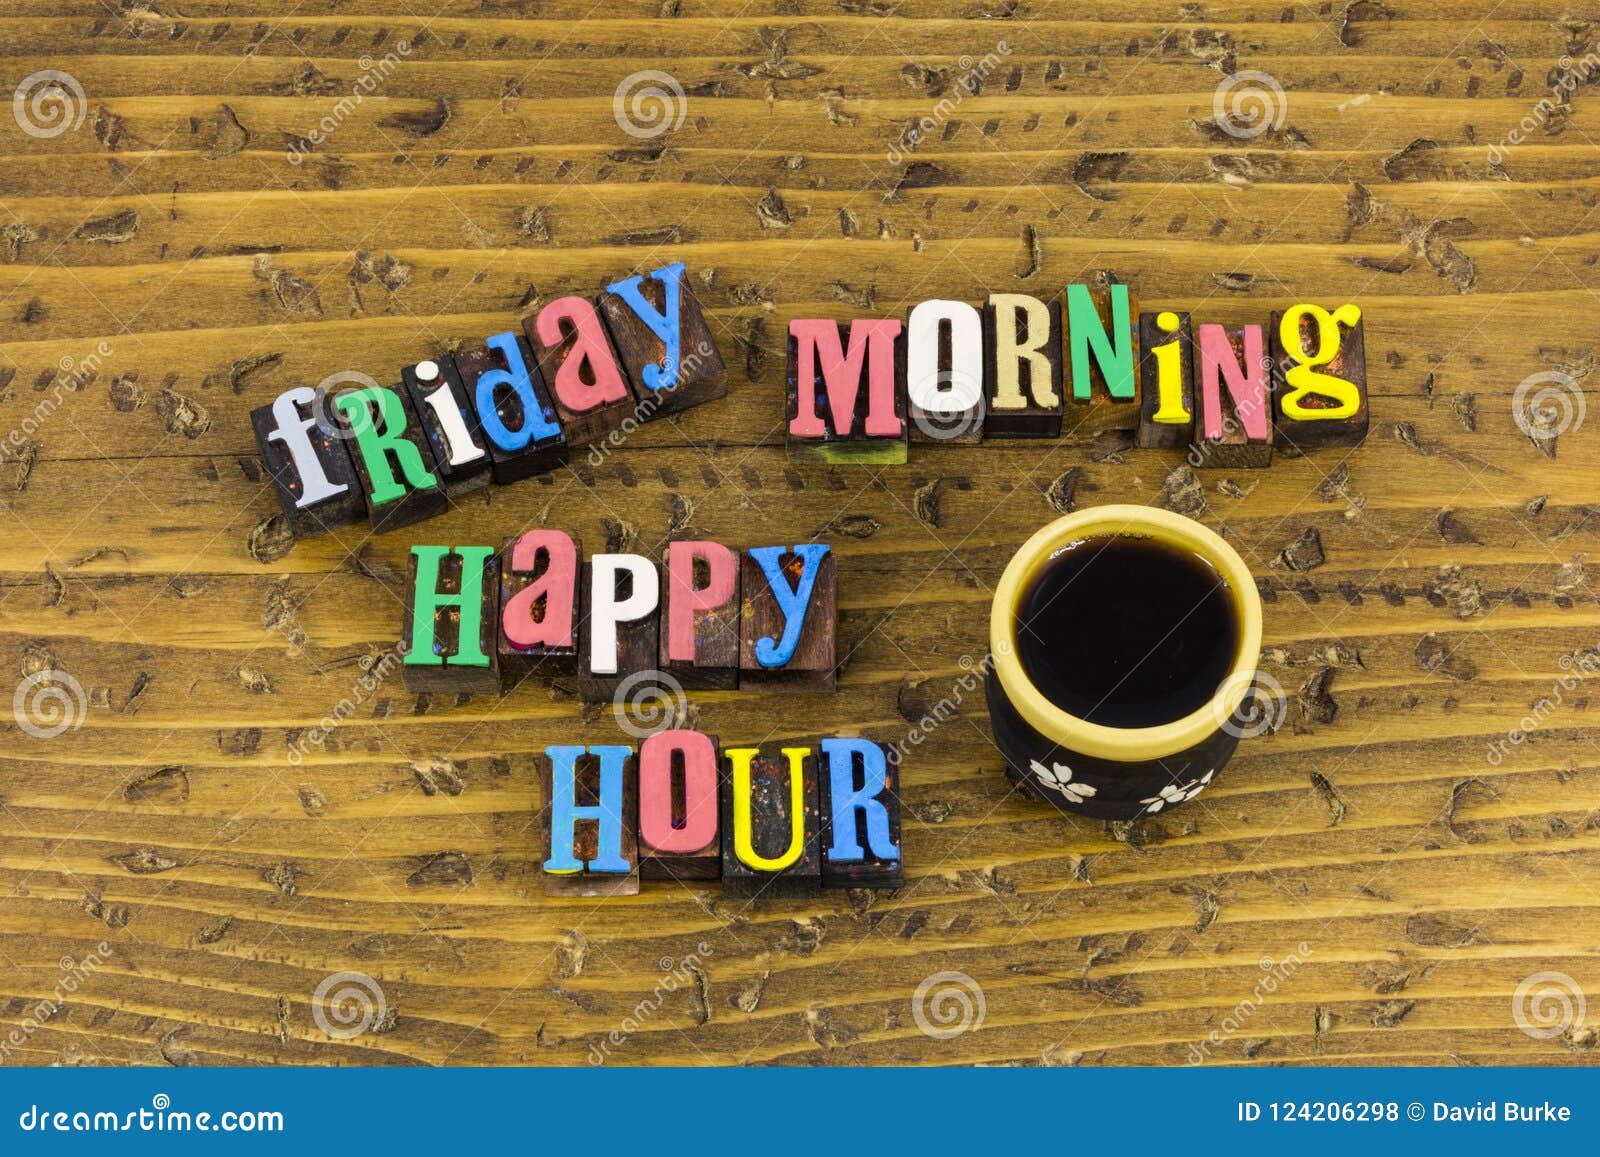 Friday morning happy hour stock photo. Image of wooden - 124206298